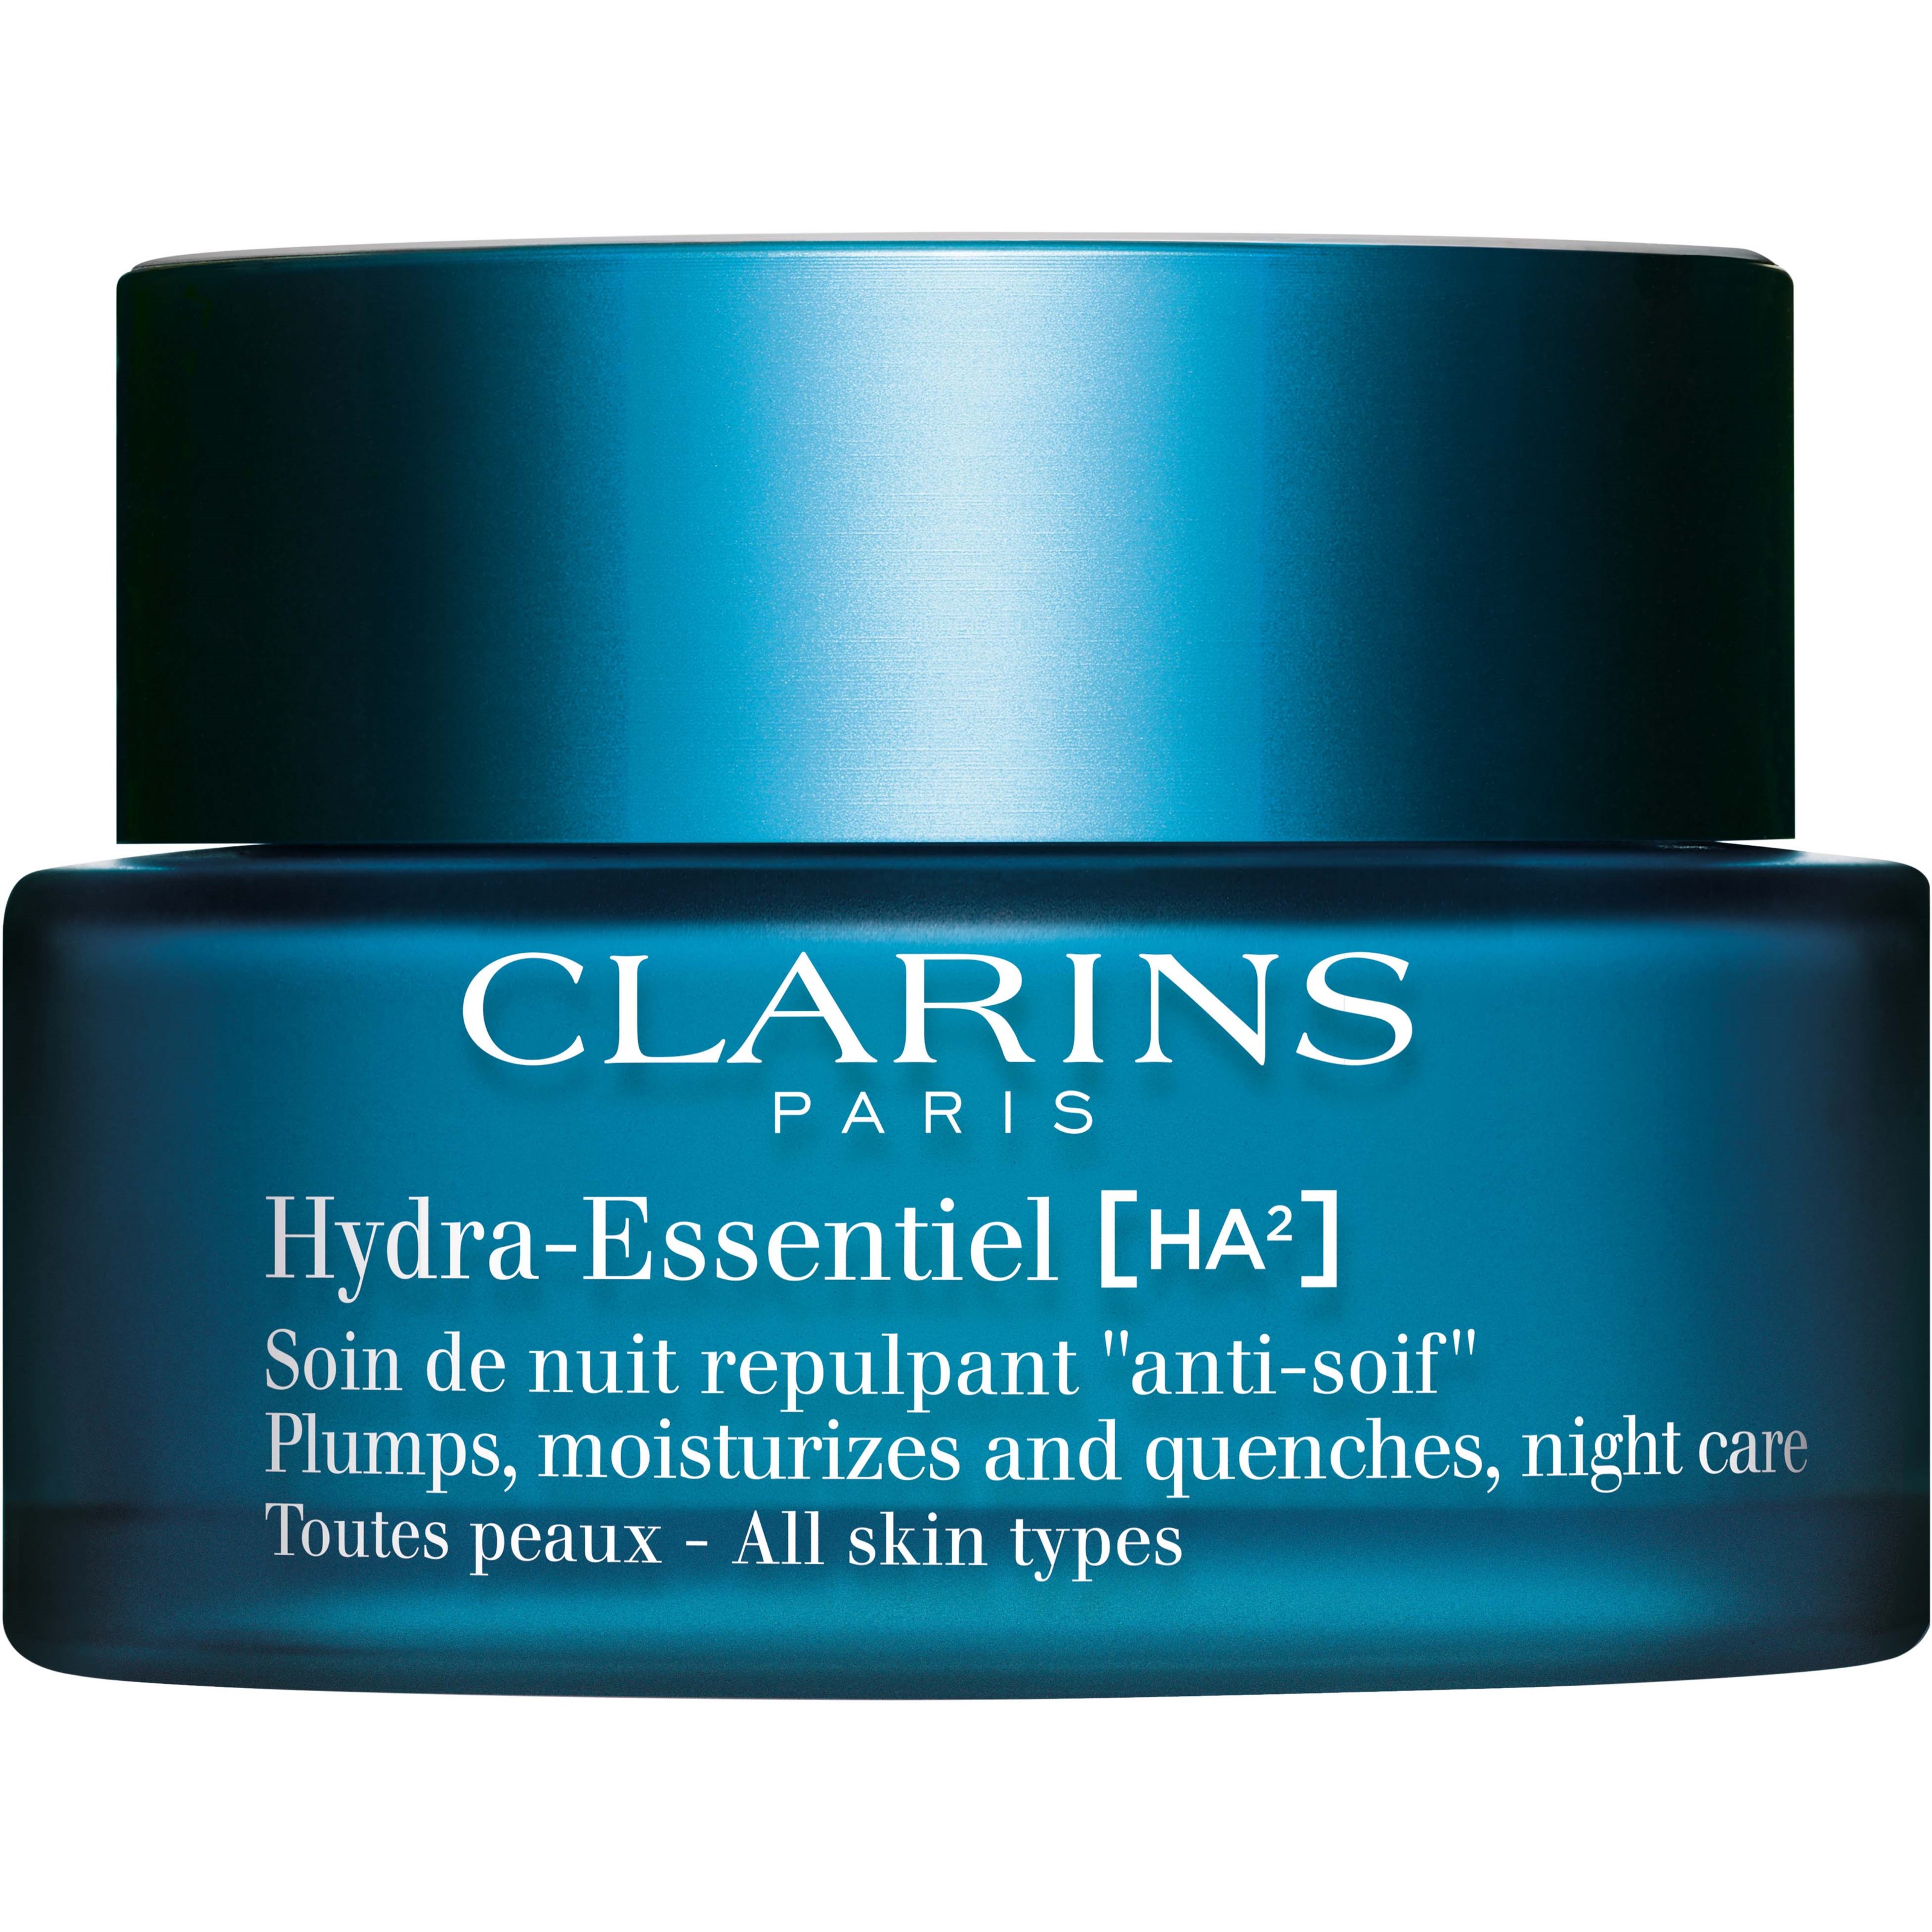 Läs mer om Clarins Hydra-Essentiel Plumps, Moisturizes and Quenches, Night Care 5